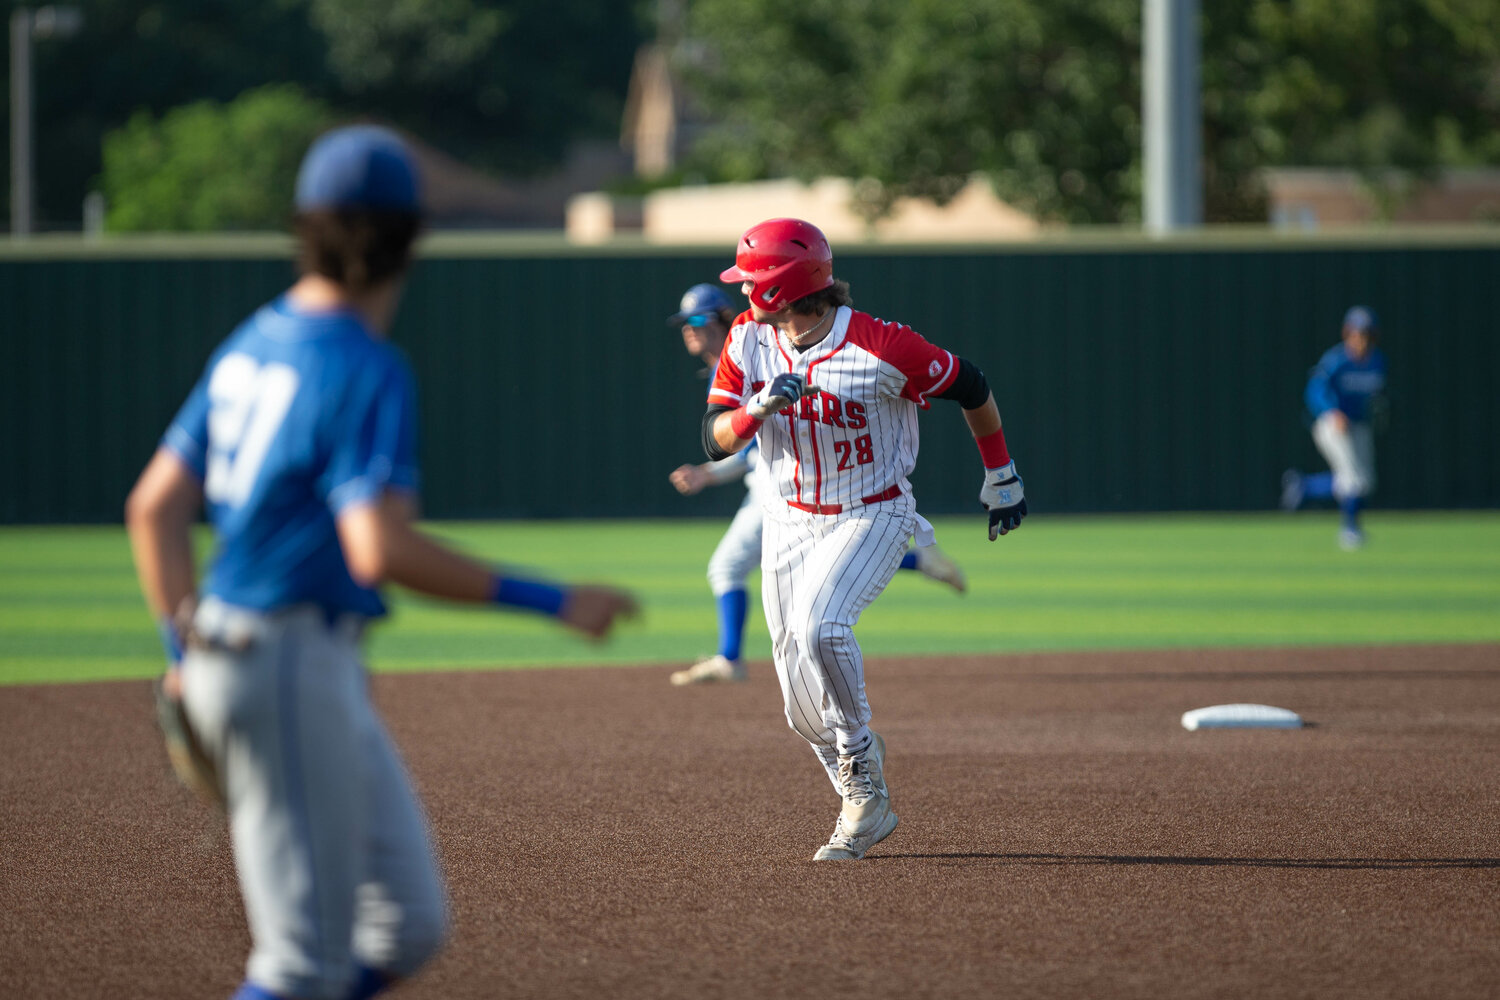 Cole Kaase heads to third base during Thursday's Regional Semifinal between Katy and Clear Springs at Langham Creek.